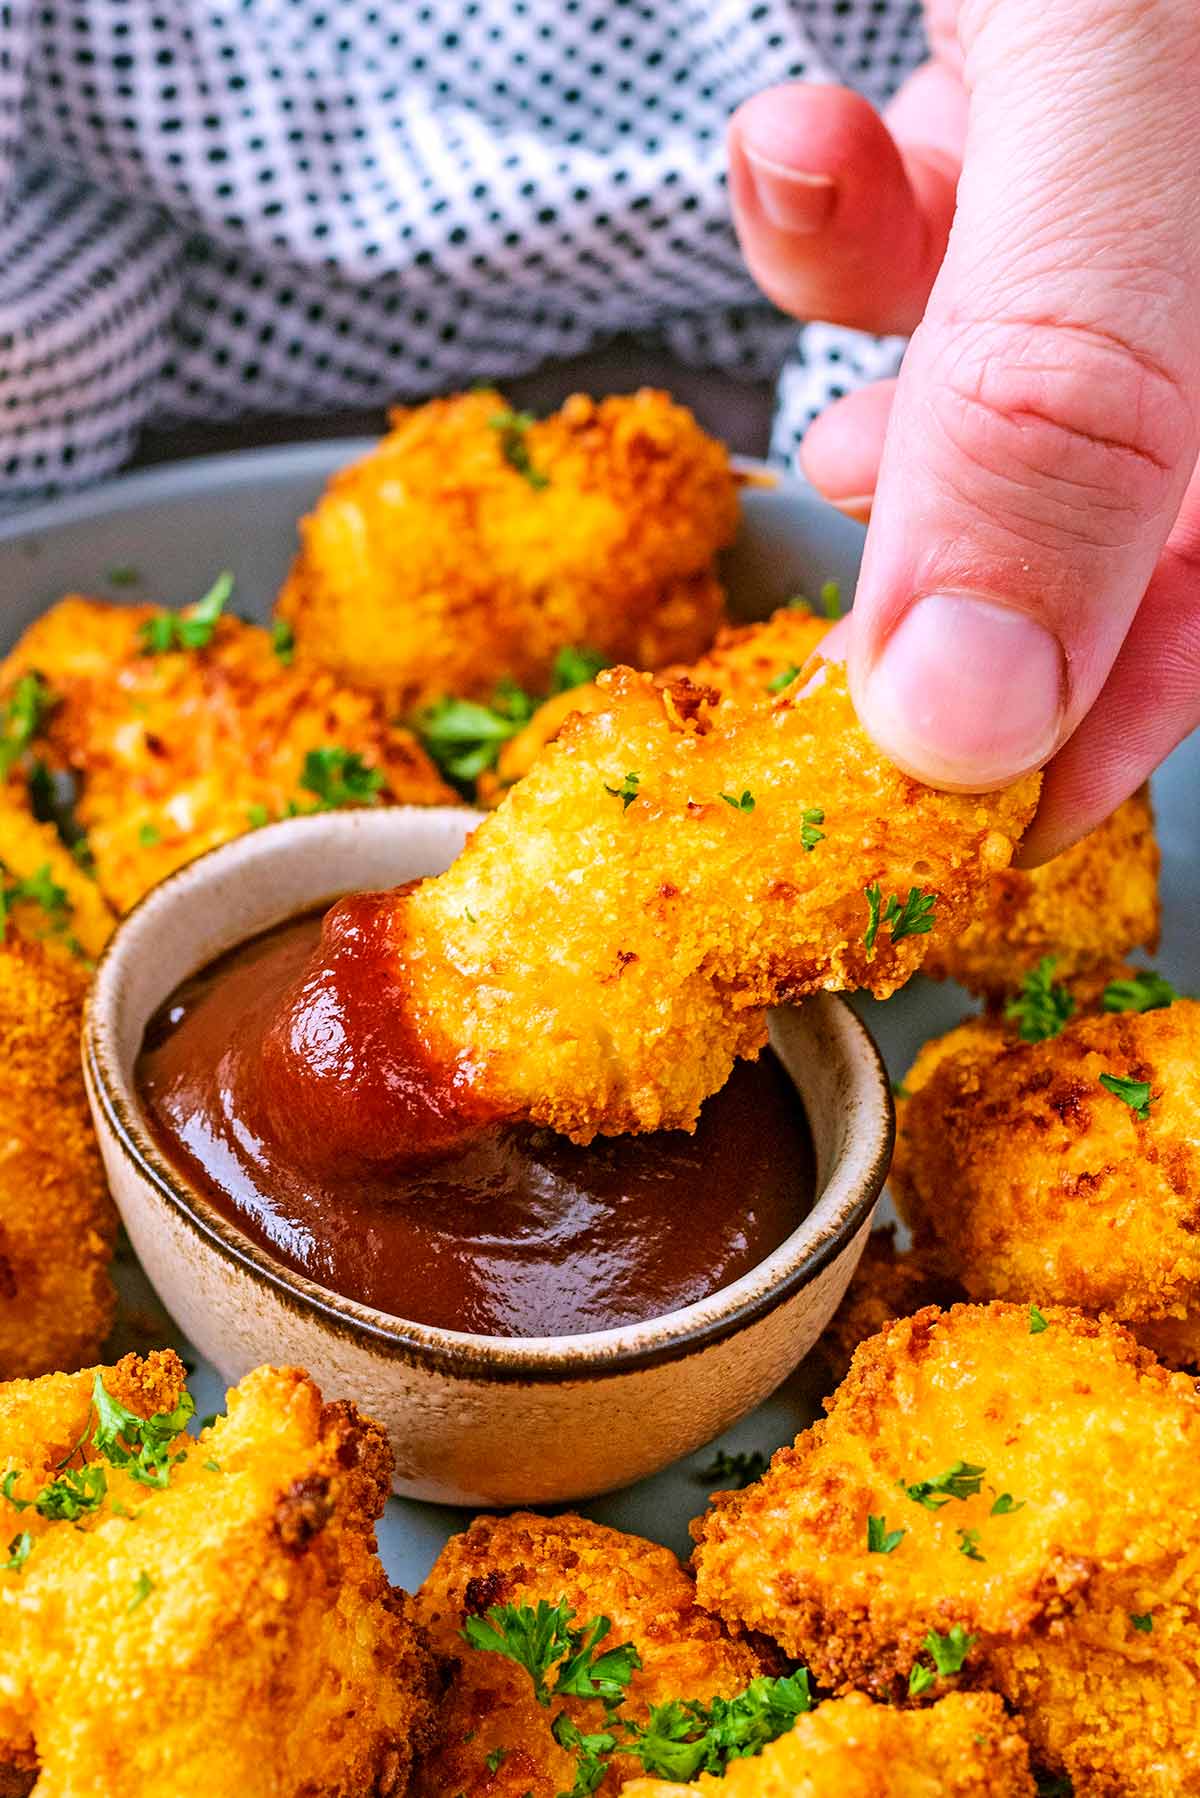 A chicken nugget being dipped into some barbecue sauce.